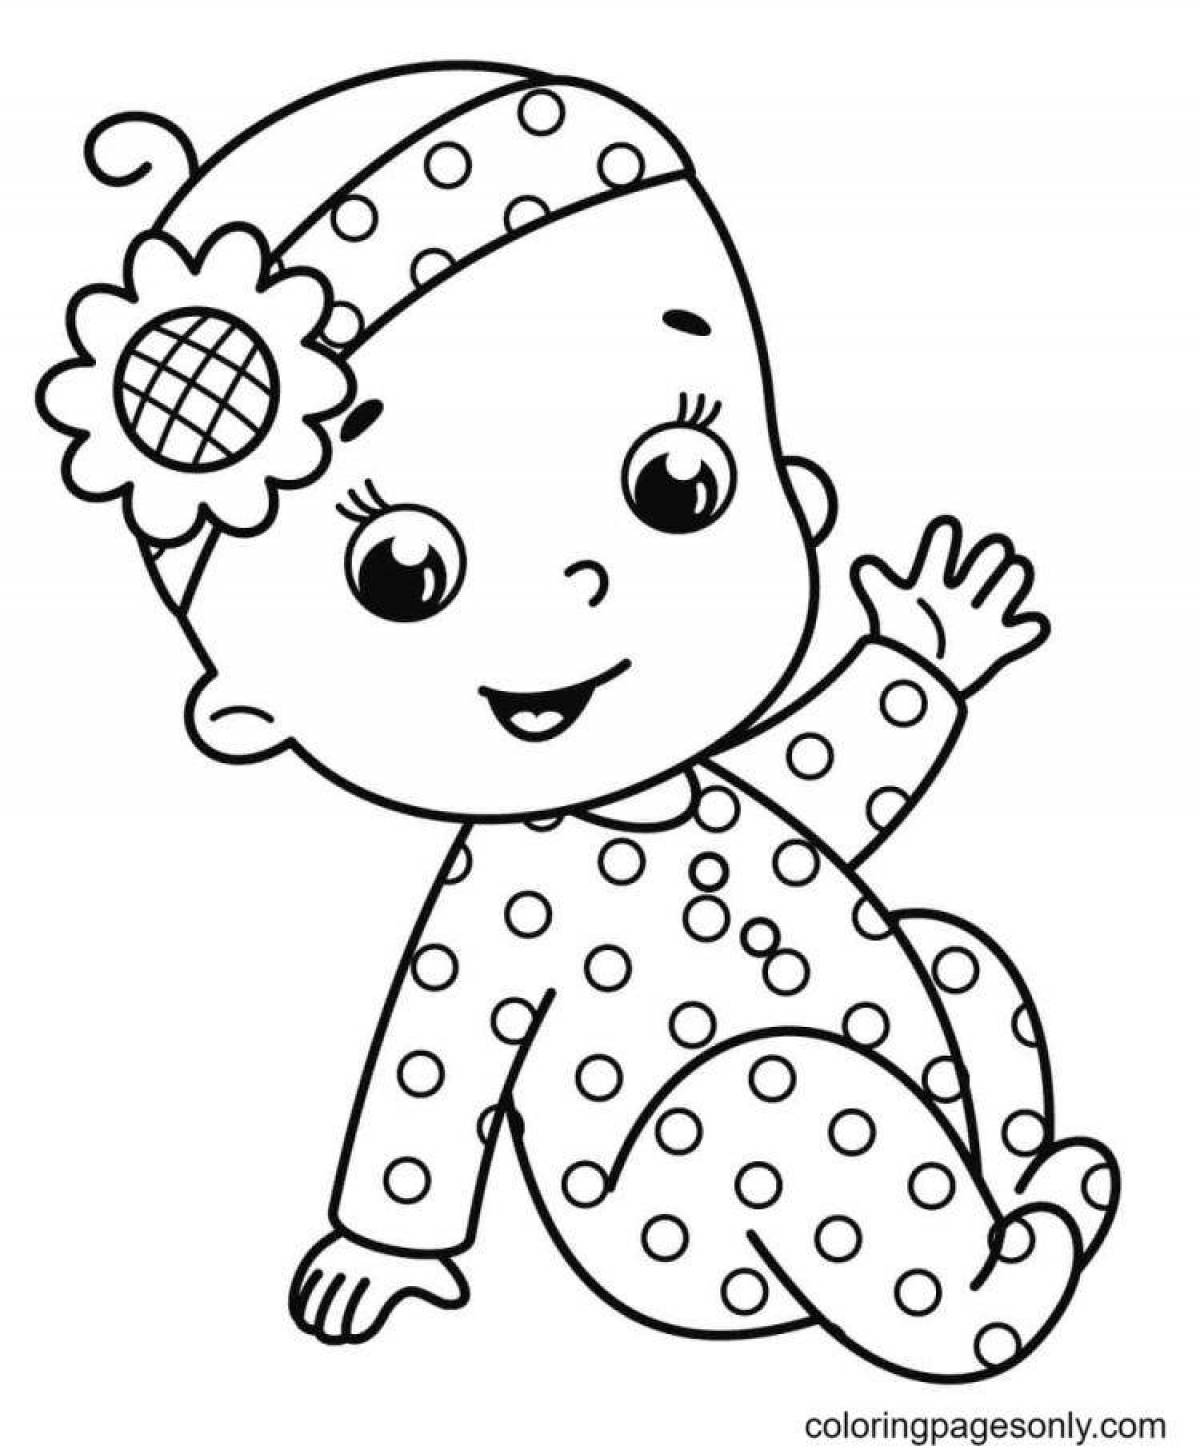 Charon glowing baby coloring page